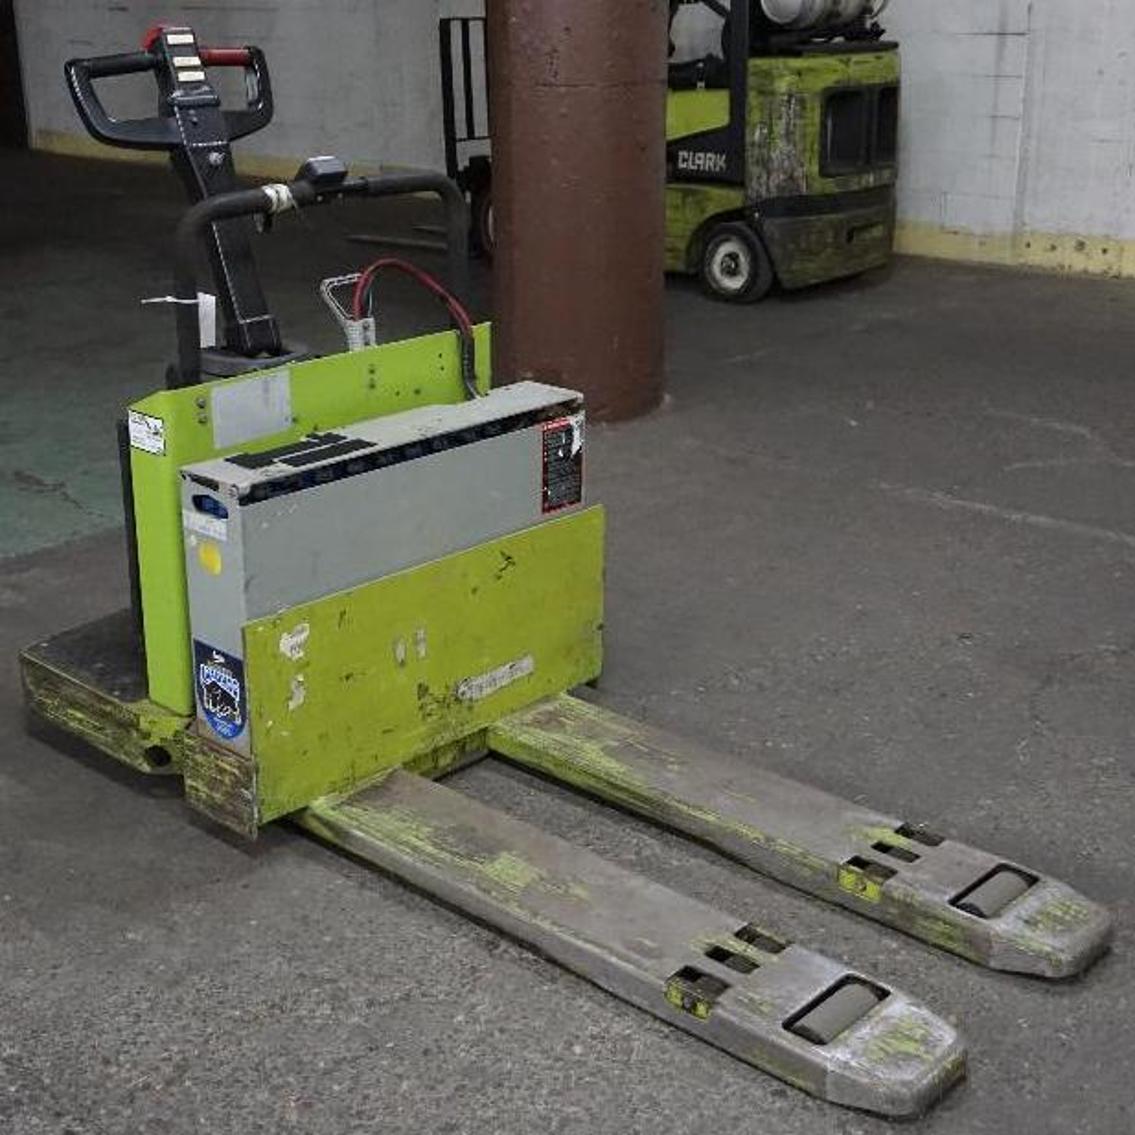 (8) Electric Pallet Jacks, Clark Forklift, Tennant Sweeper, and Pallet Racking